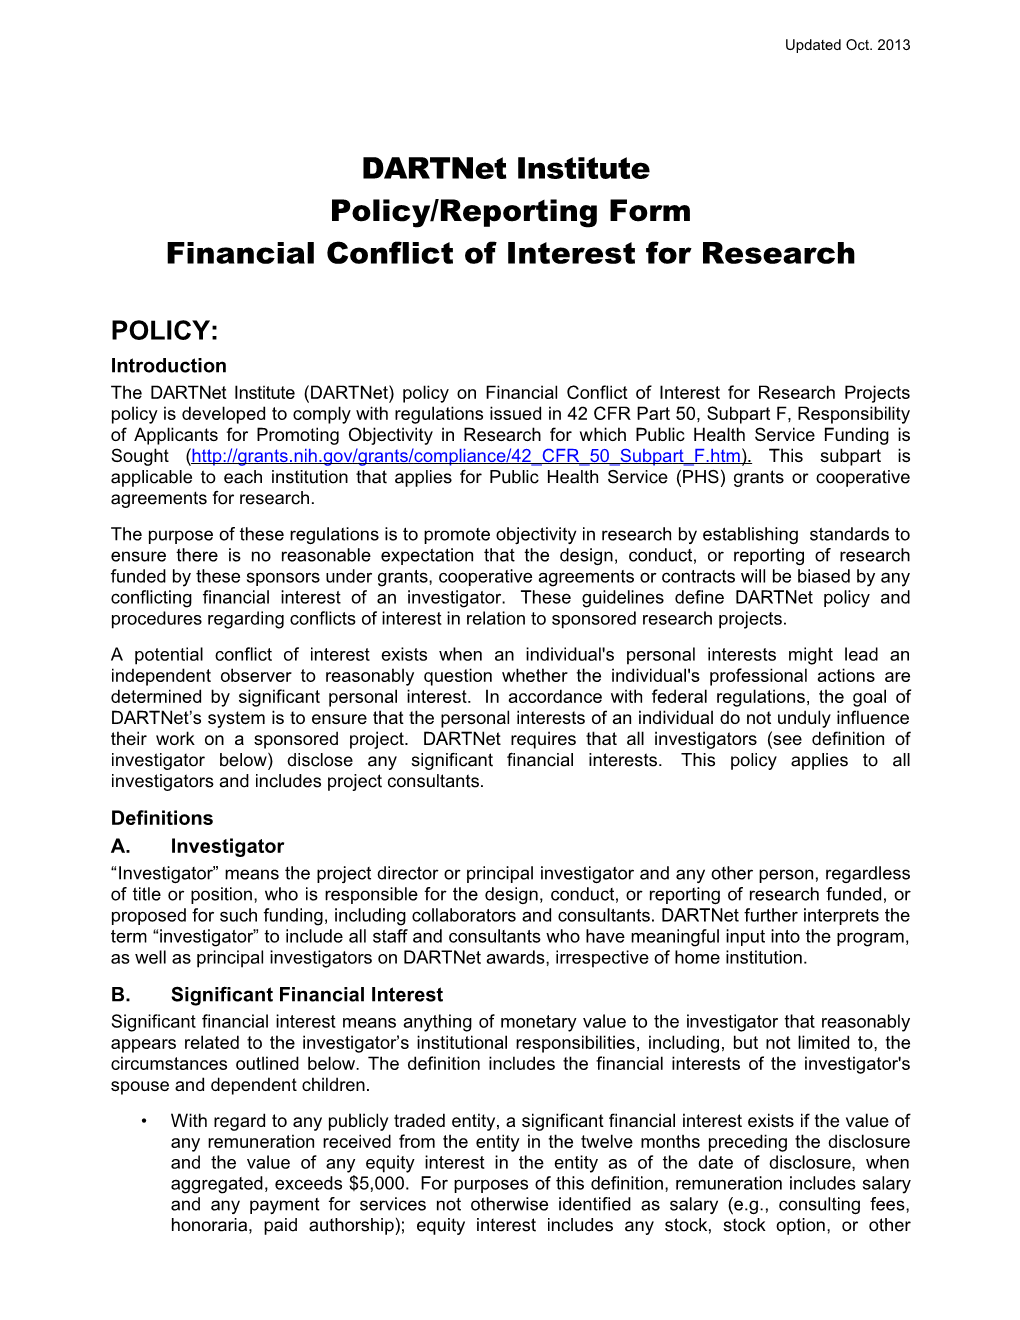 Financial Conflict of Interest for Research